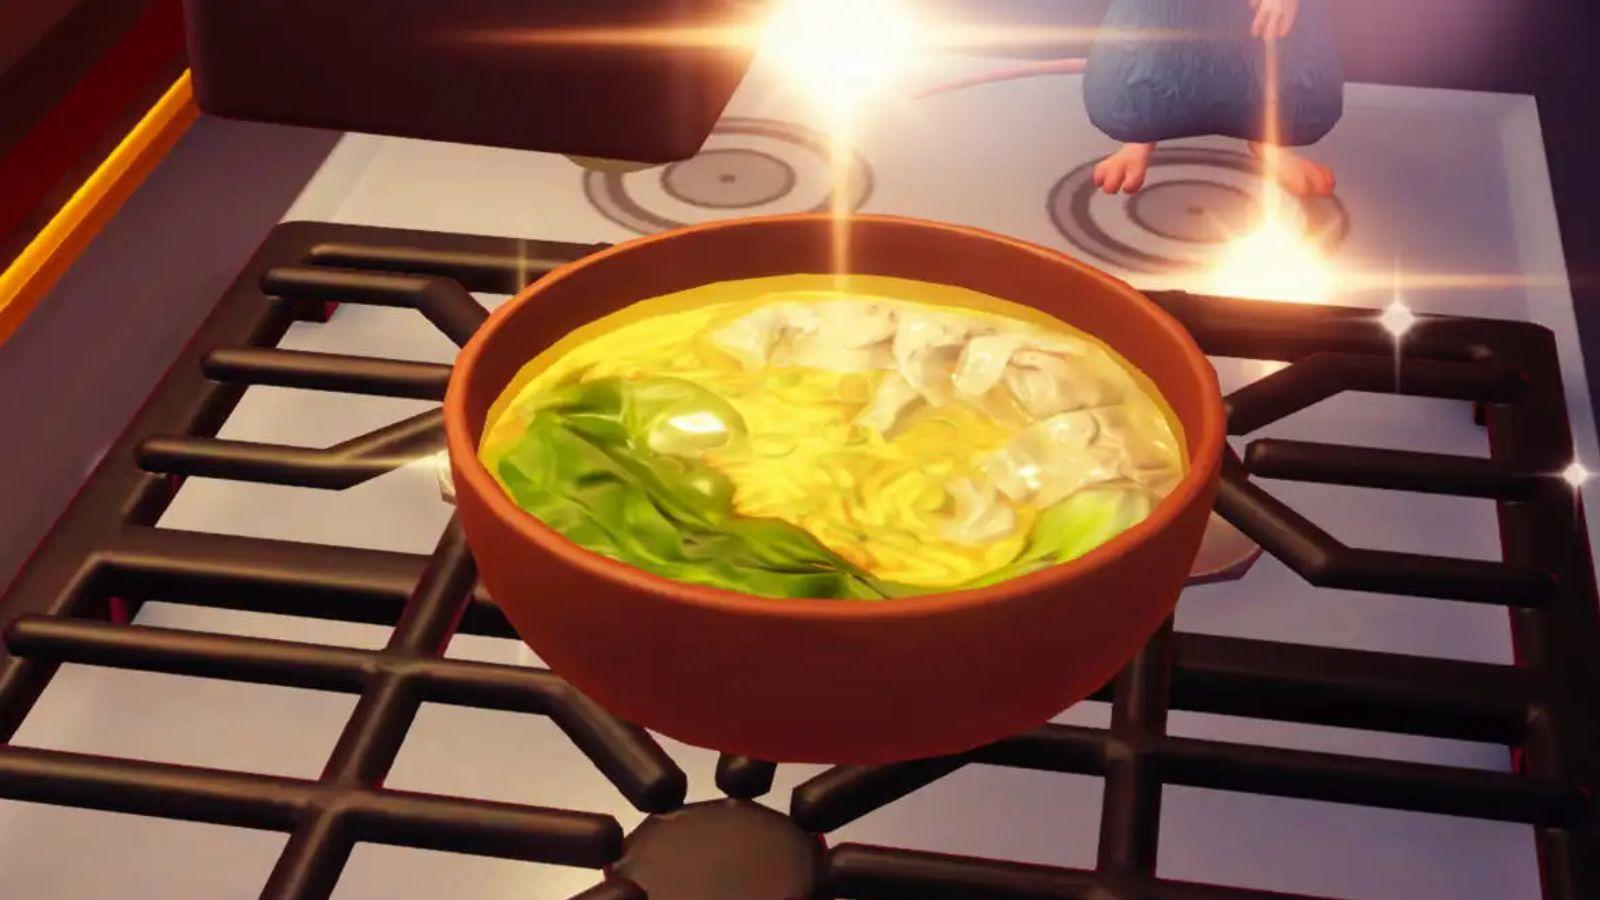 How to make Wonton Soup in Disney Dreamlight Valley